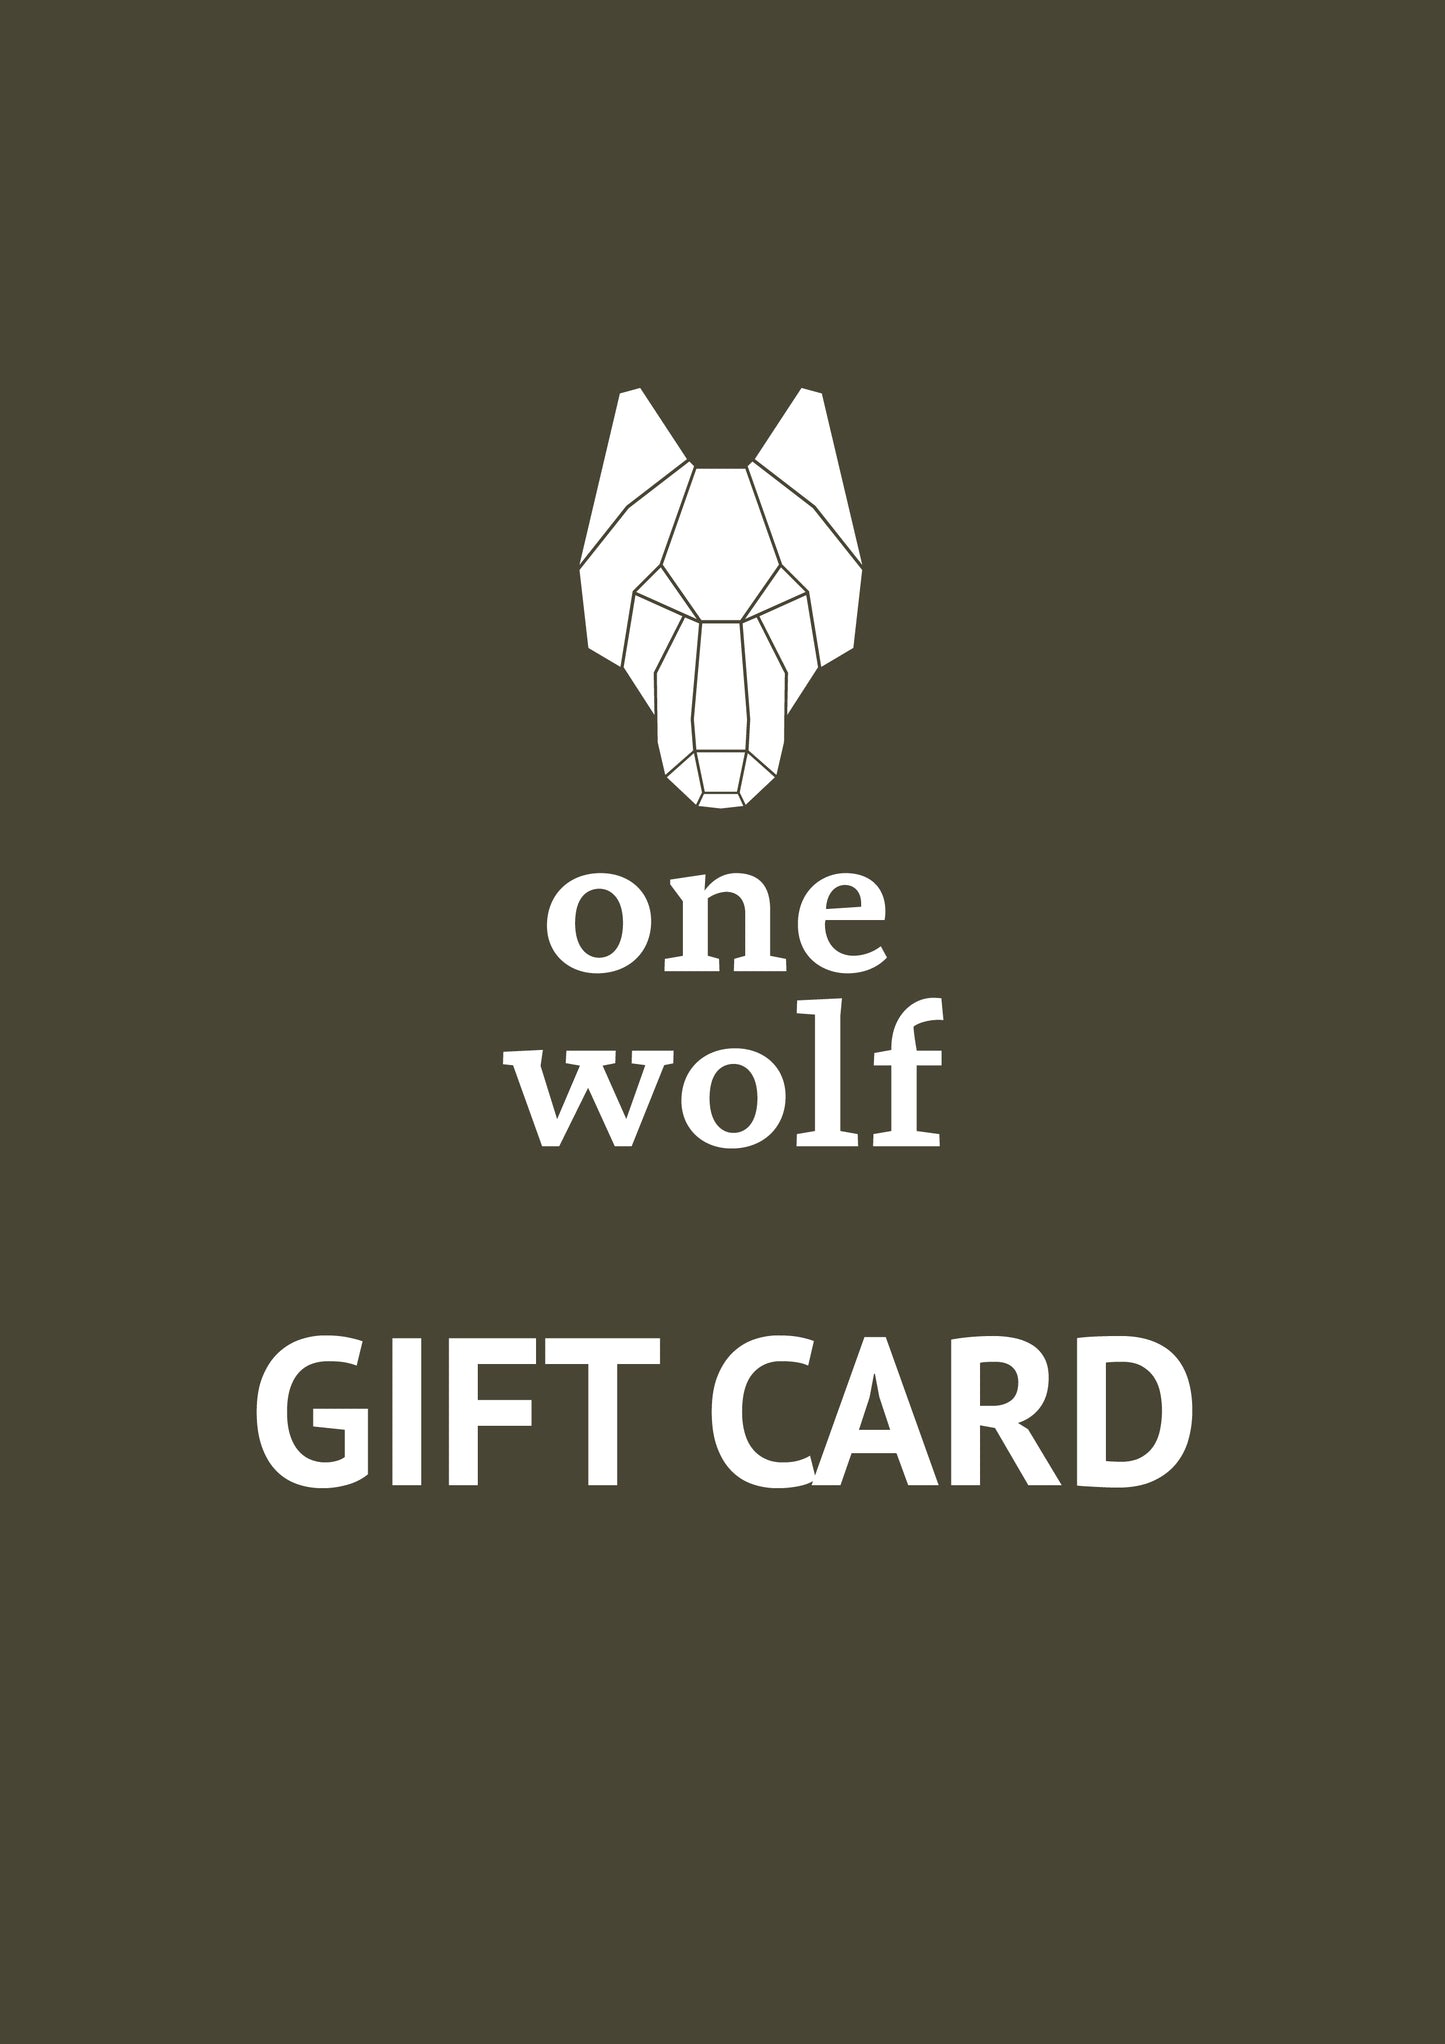 One Wolf Gift Card - One Wolf